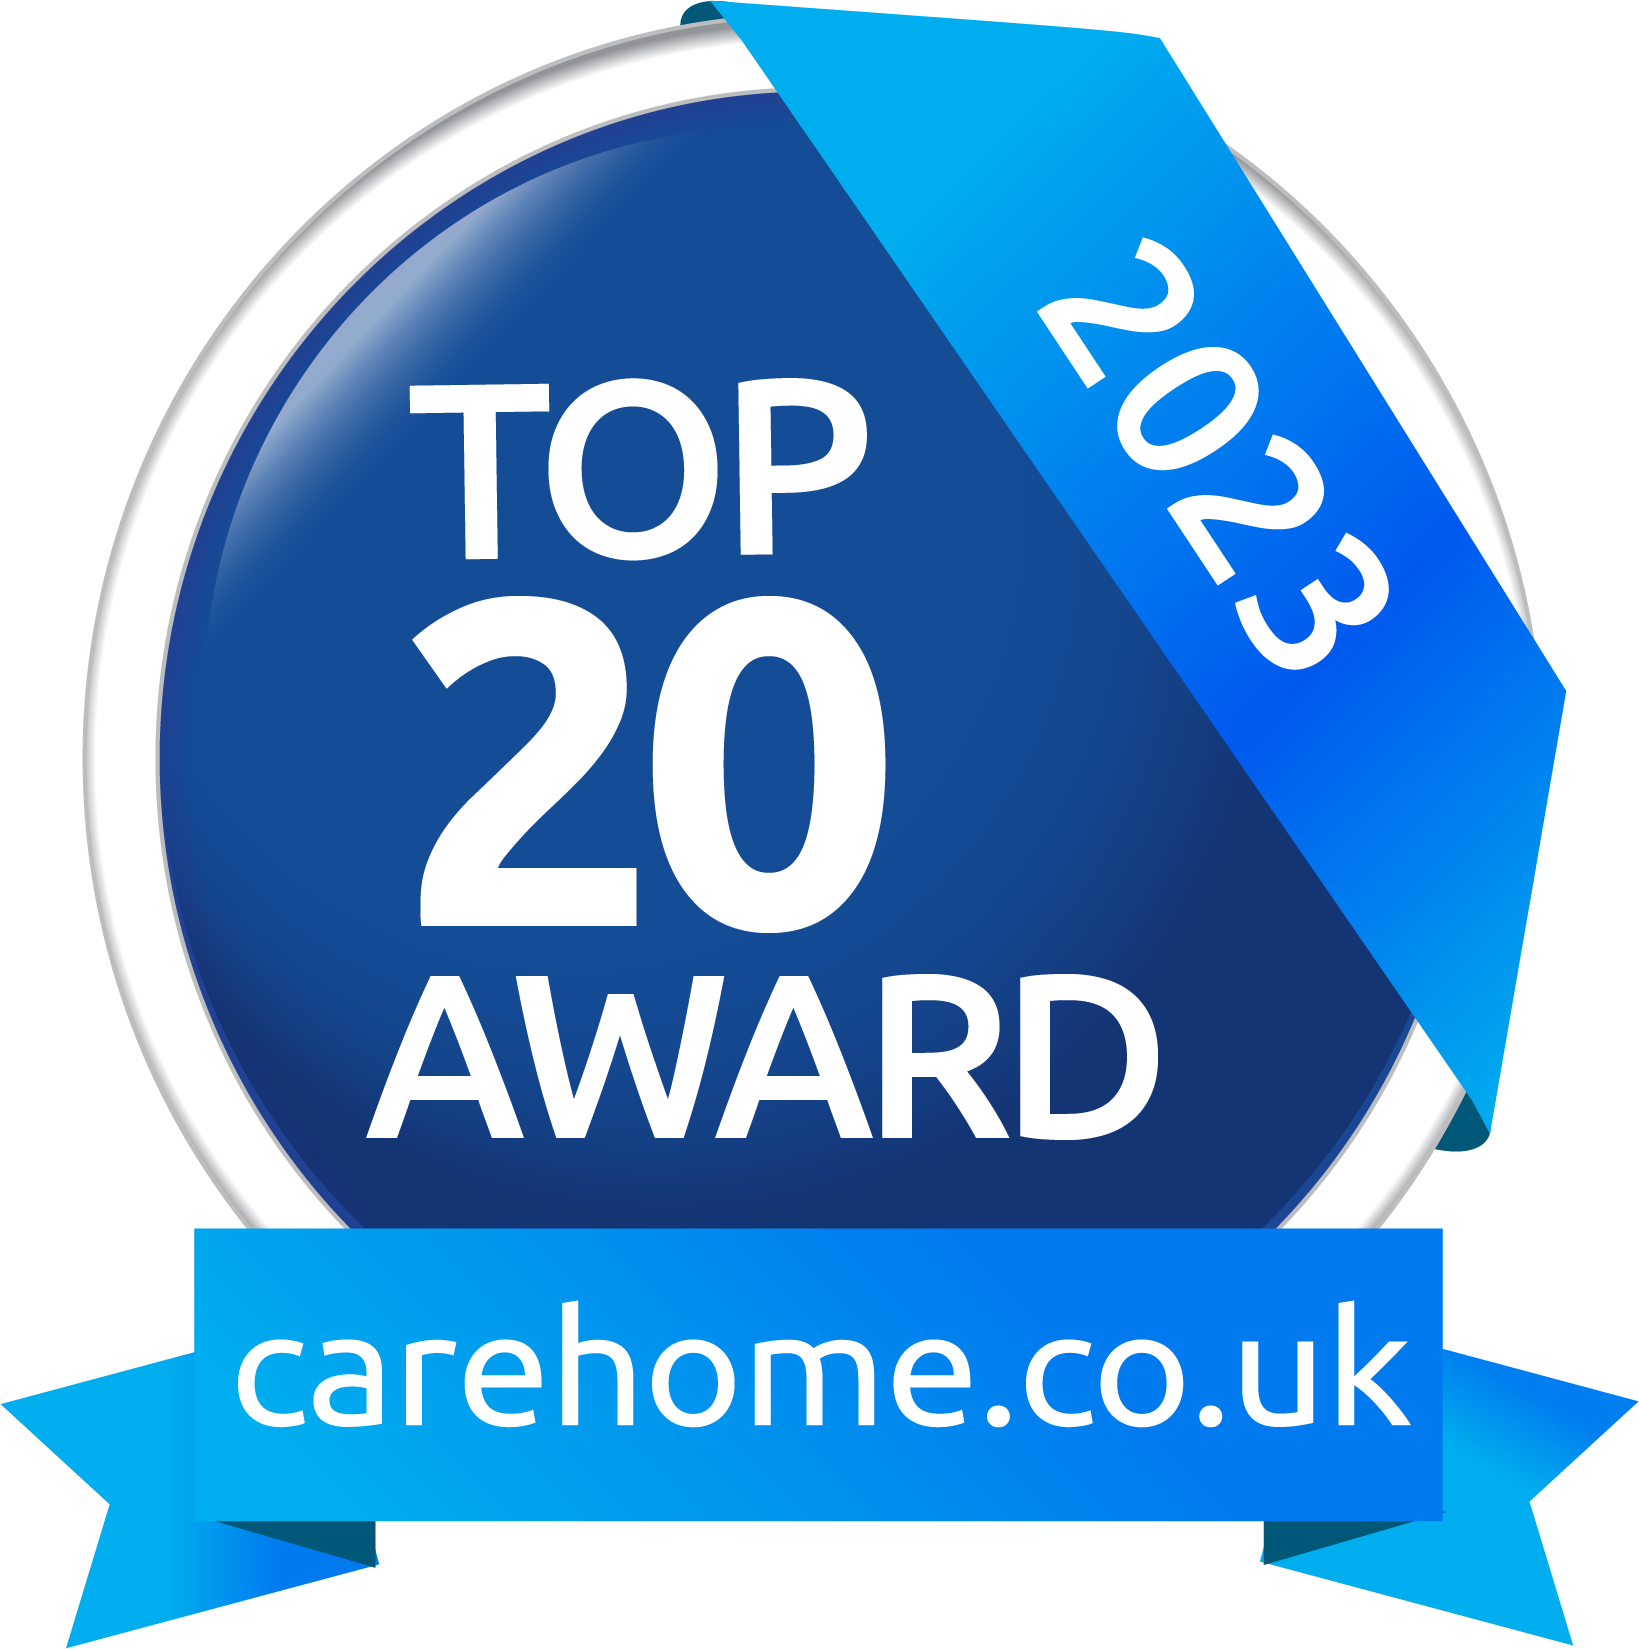 Elsyng House was awarded a Top 20 Care Home Award 2023 from CareHome.co.uk